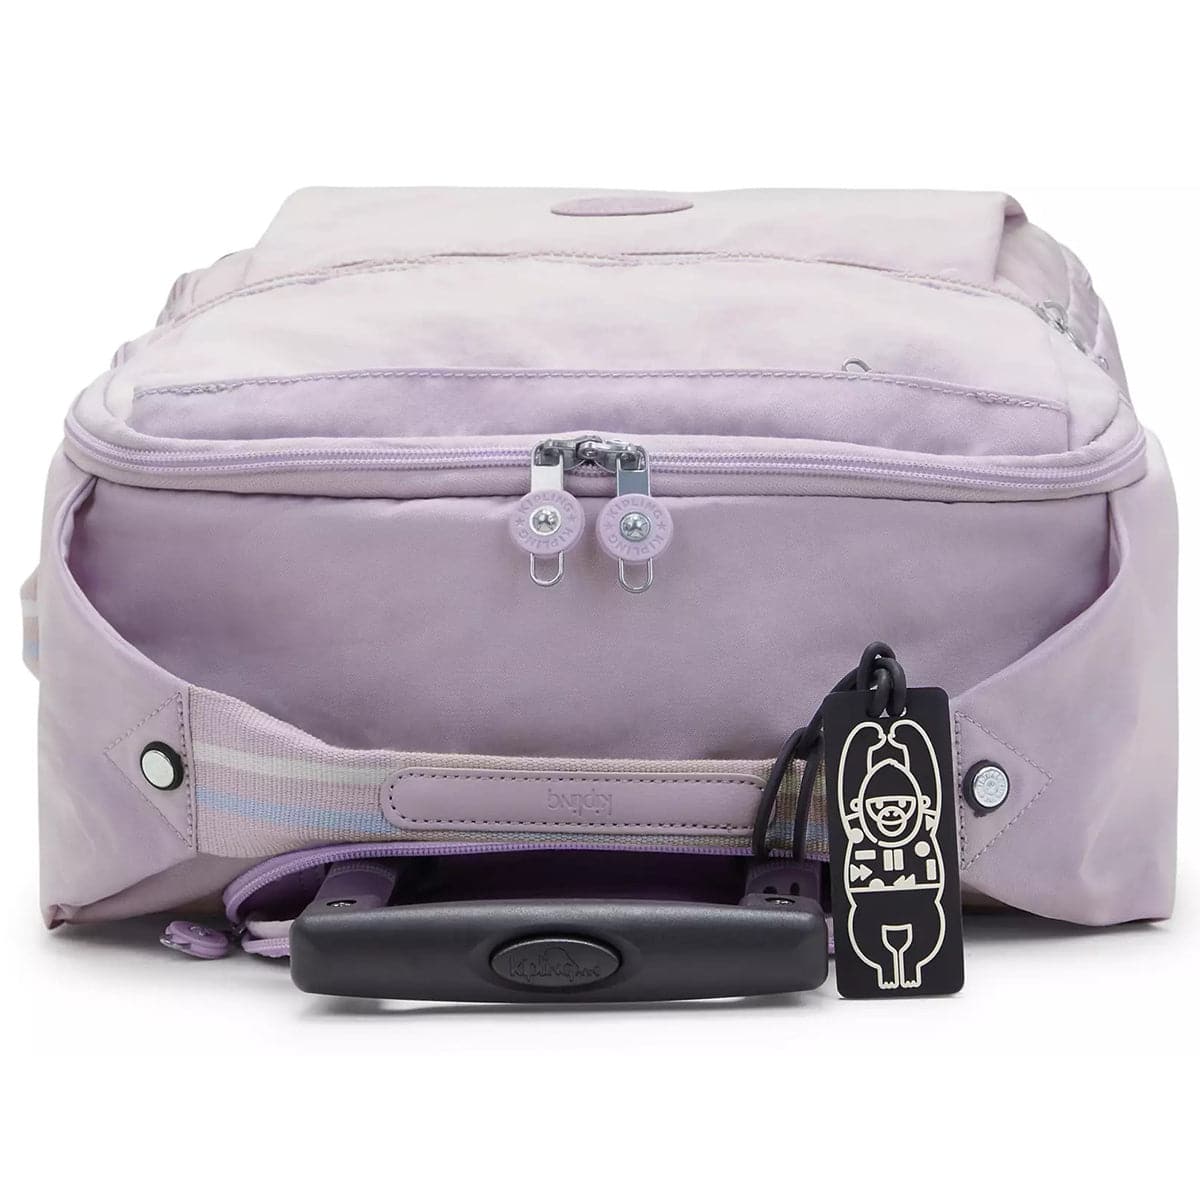 Kipling Darcey Small Carry-On Rolling Luggage